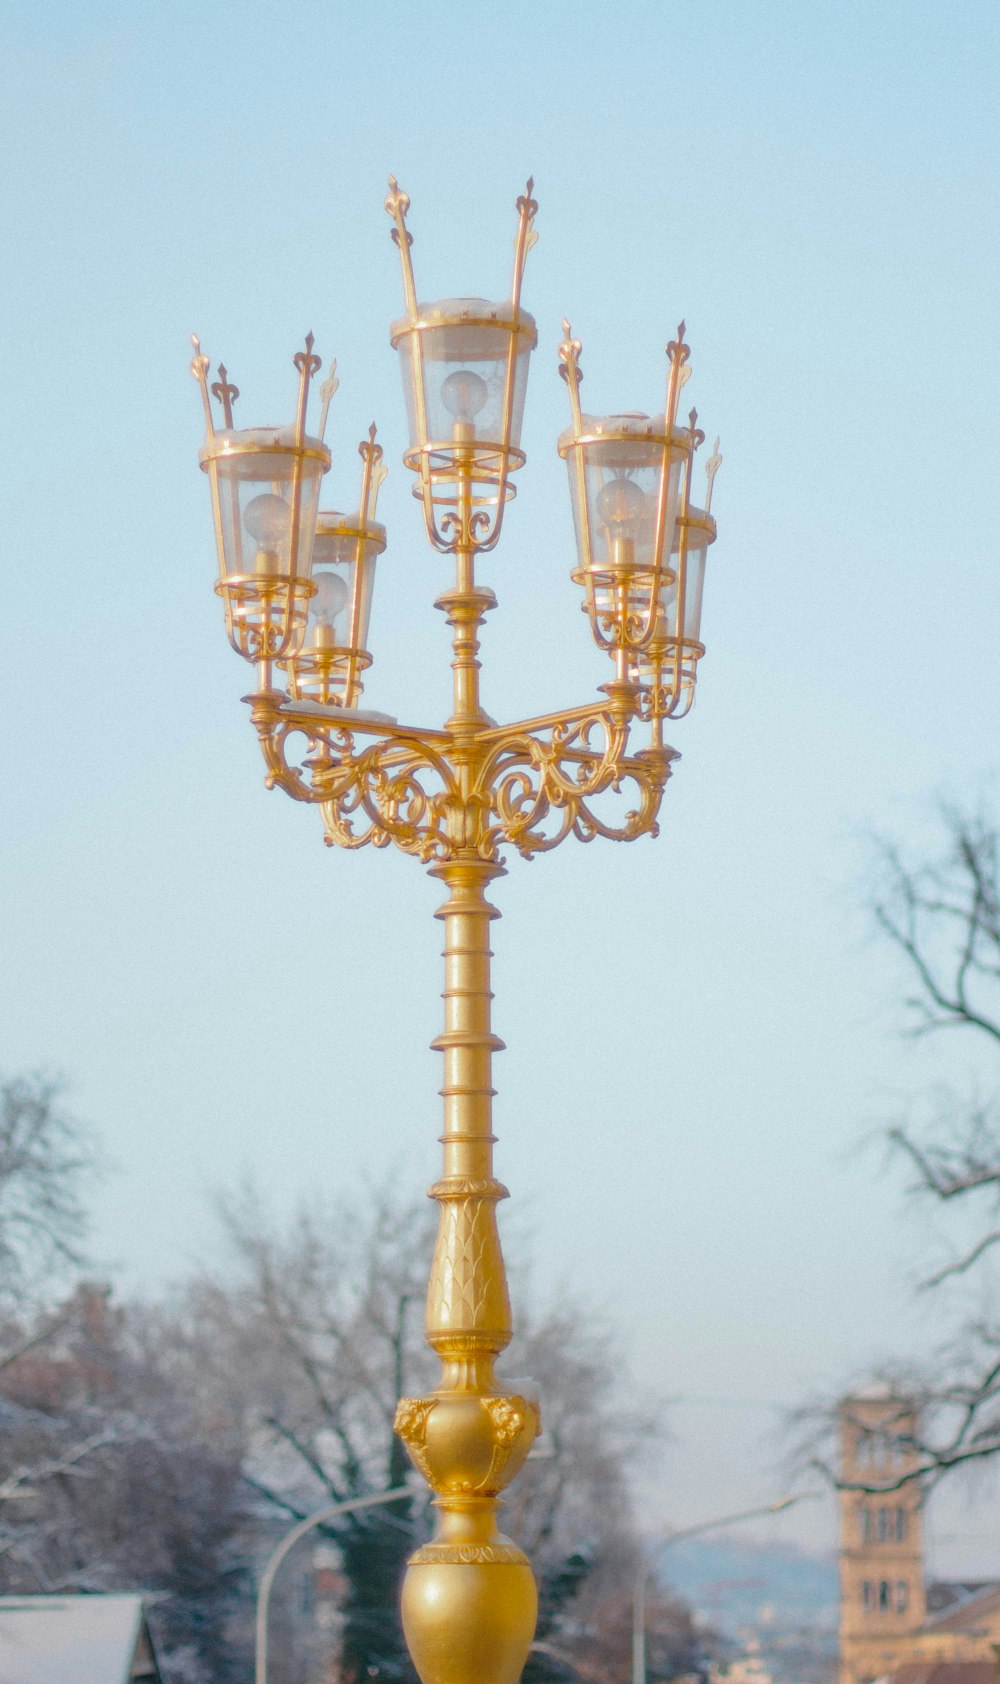 a street light with four lights on top of it